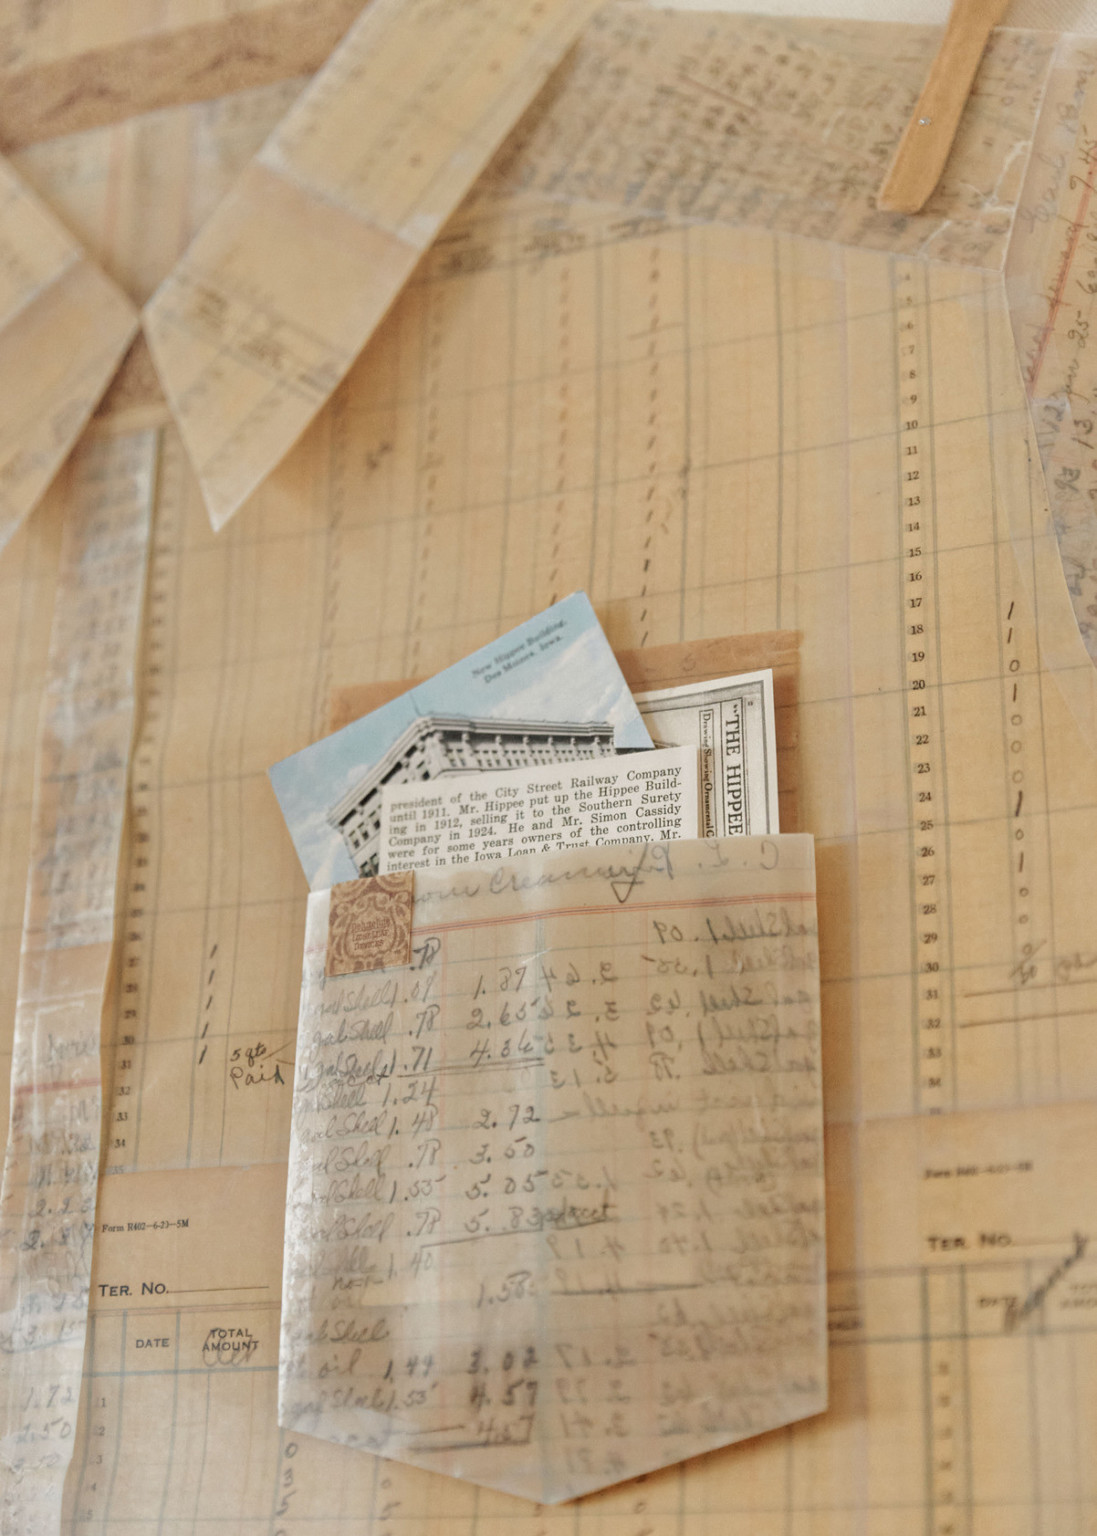 Closeup of old paper crafted into collared shirt with pocket containing slips of paper with building image and information